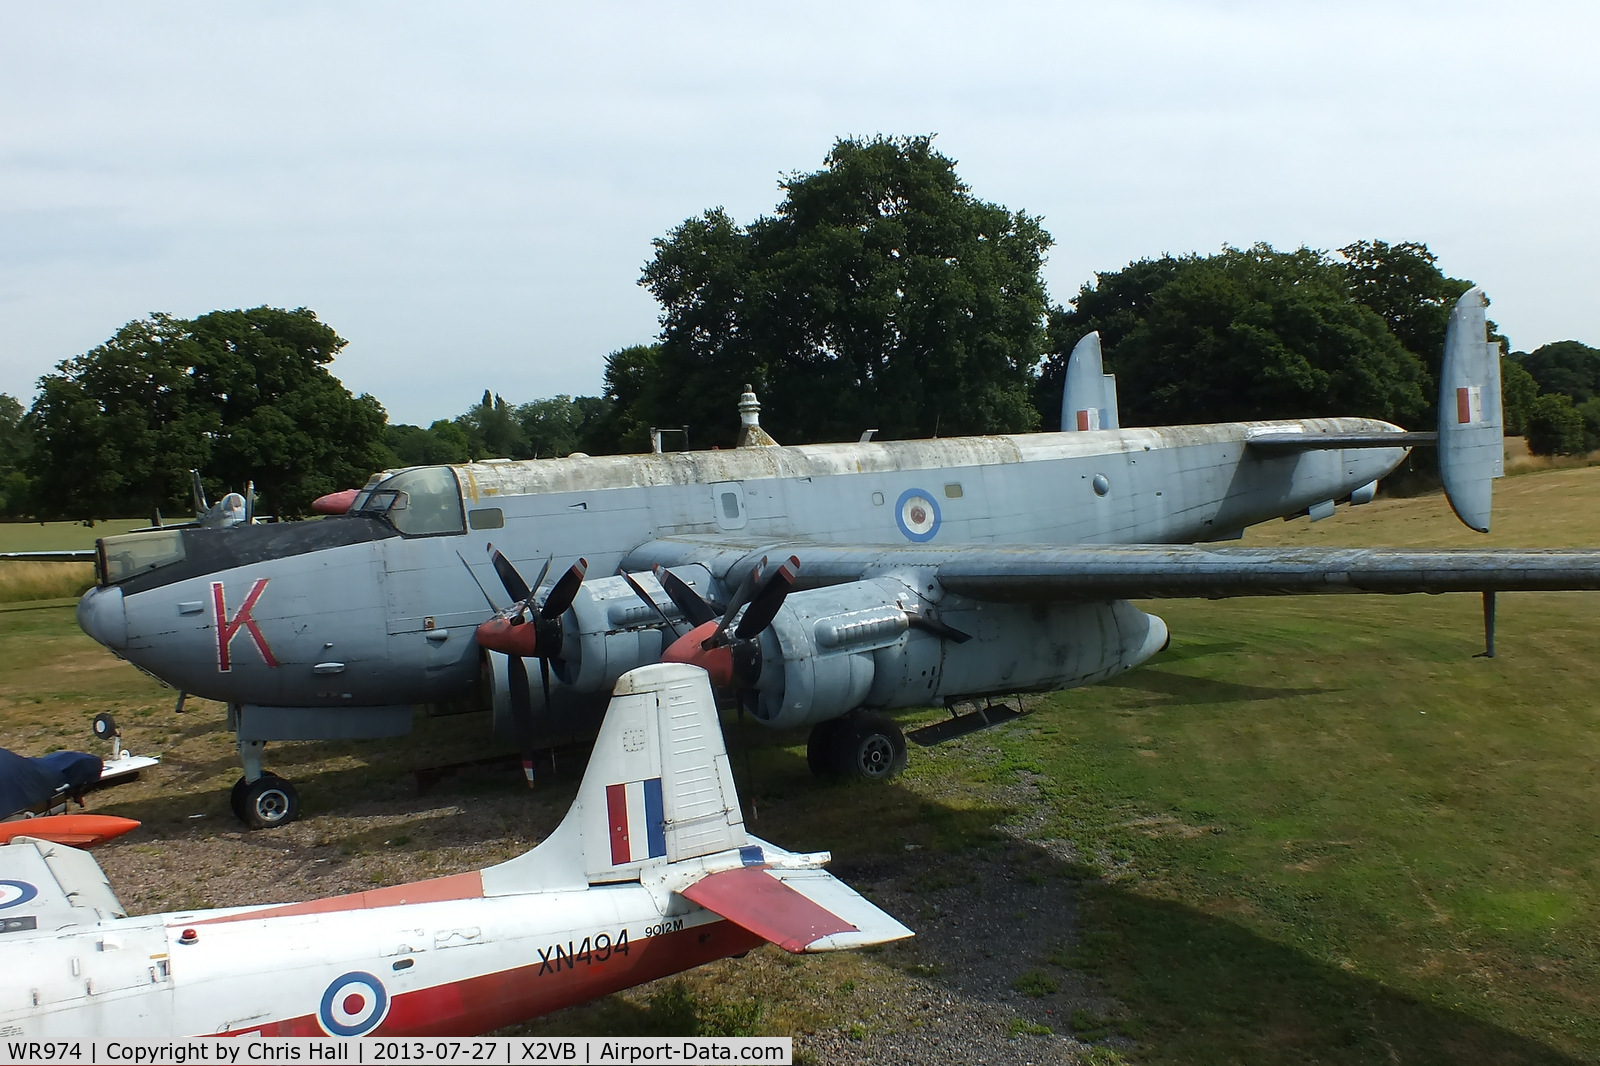 WR974, 1957 Avro 716 Shackleton MR.3/3 C/N Not found WR974, displayed at the Gatwick Aviation Museum